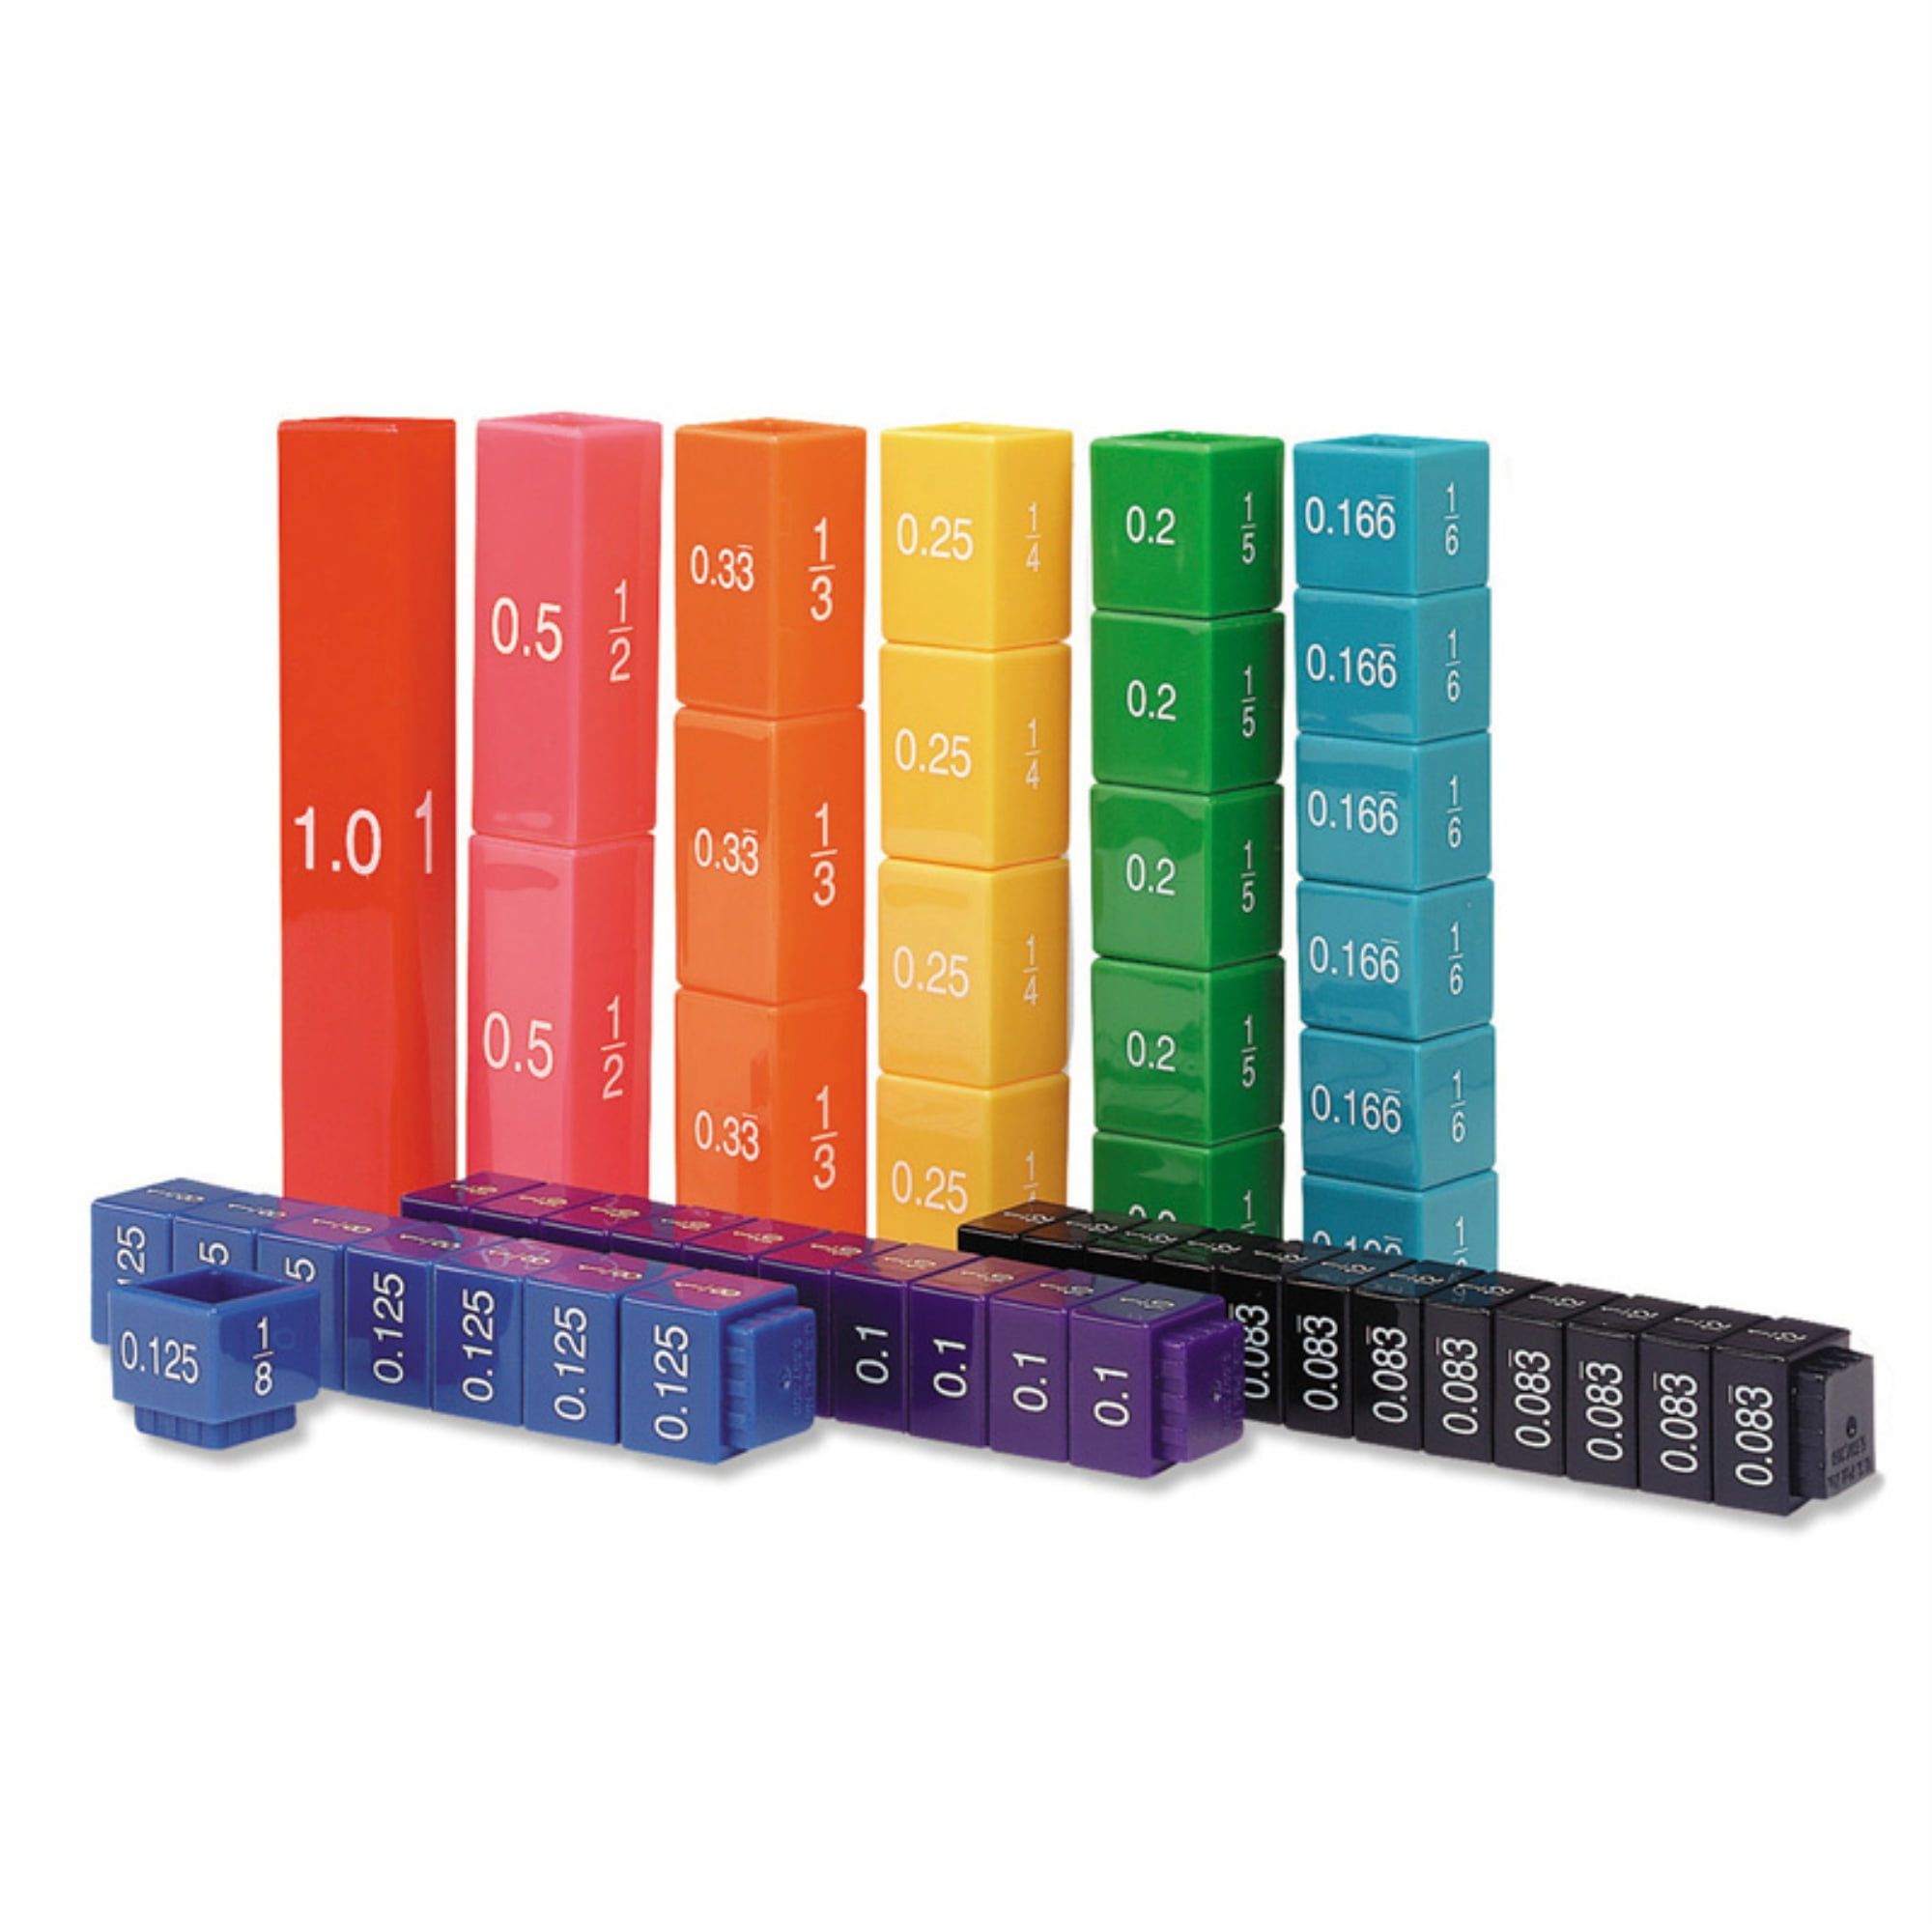 Lot of 72 Learning Math Manipulative Counting INCH-WORM Snap Cube ETA Cuisenaire 